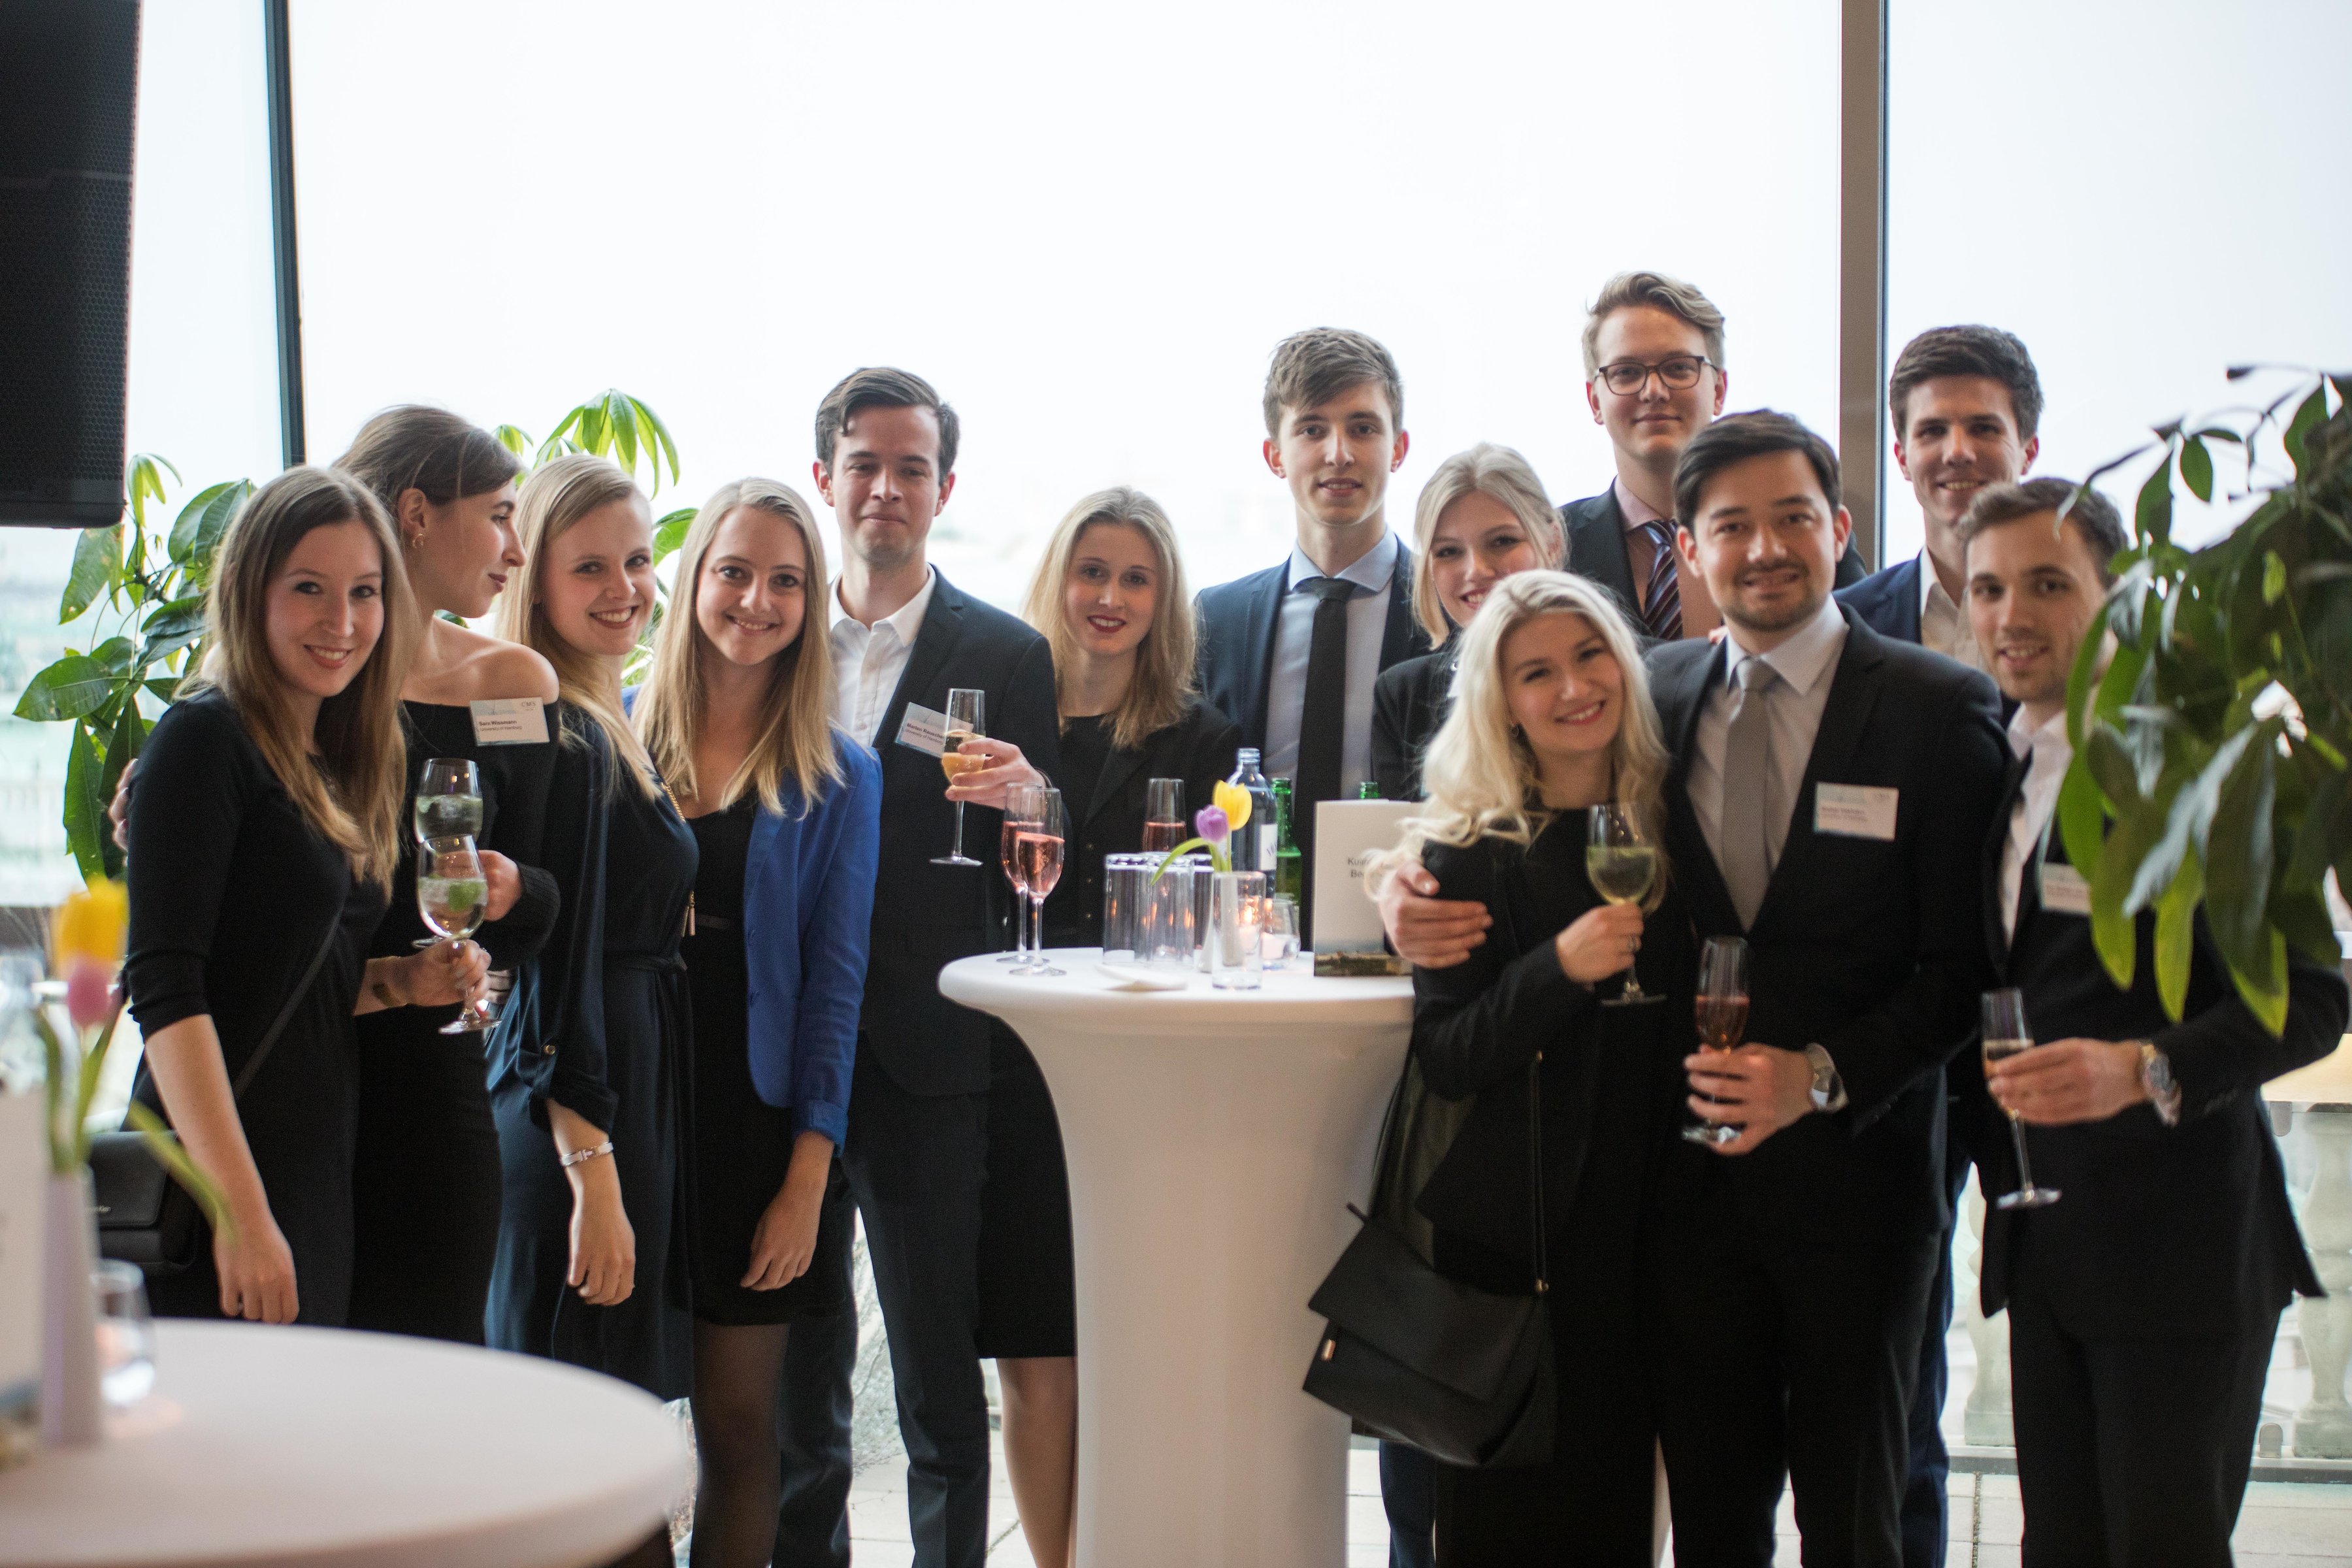 Students and their coaches at the annual Willem C. International Commercial Arbitration Moot.